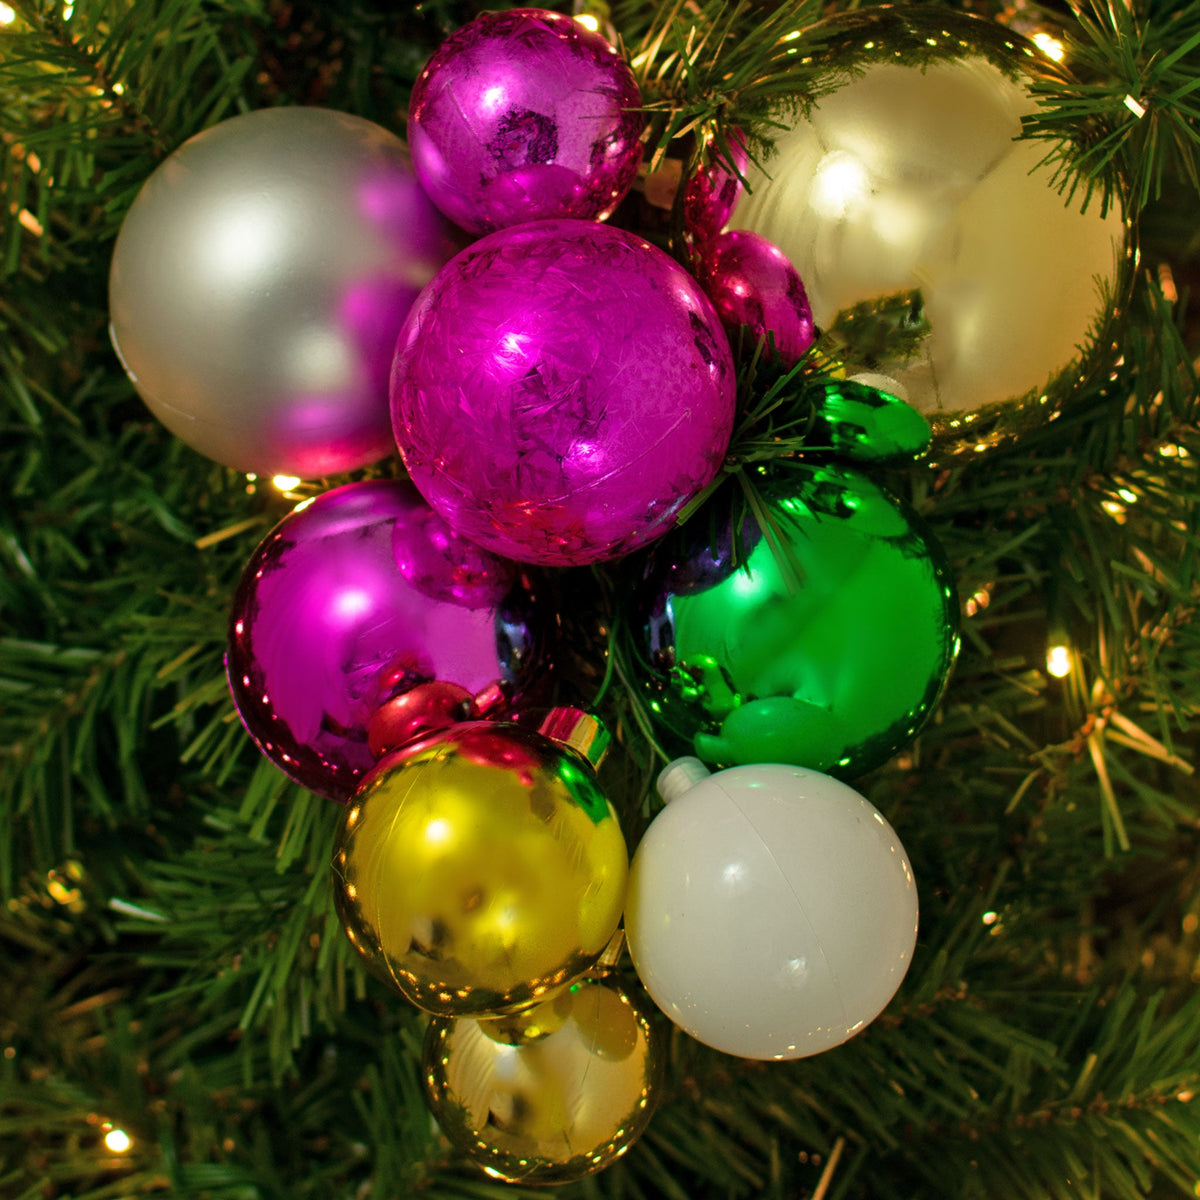 The San Francisco Christmas Ball Clusters with Shiny Multi-Color Ornaments will make your Christmas Trees, Garlands, and Wreaths beautiful this holiday season